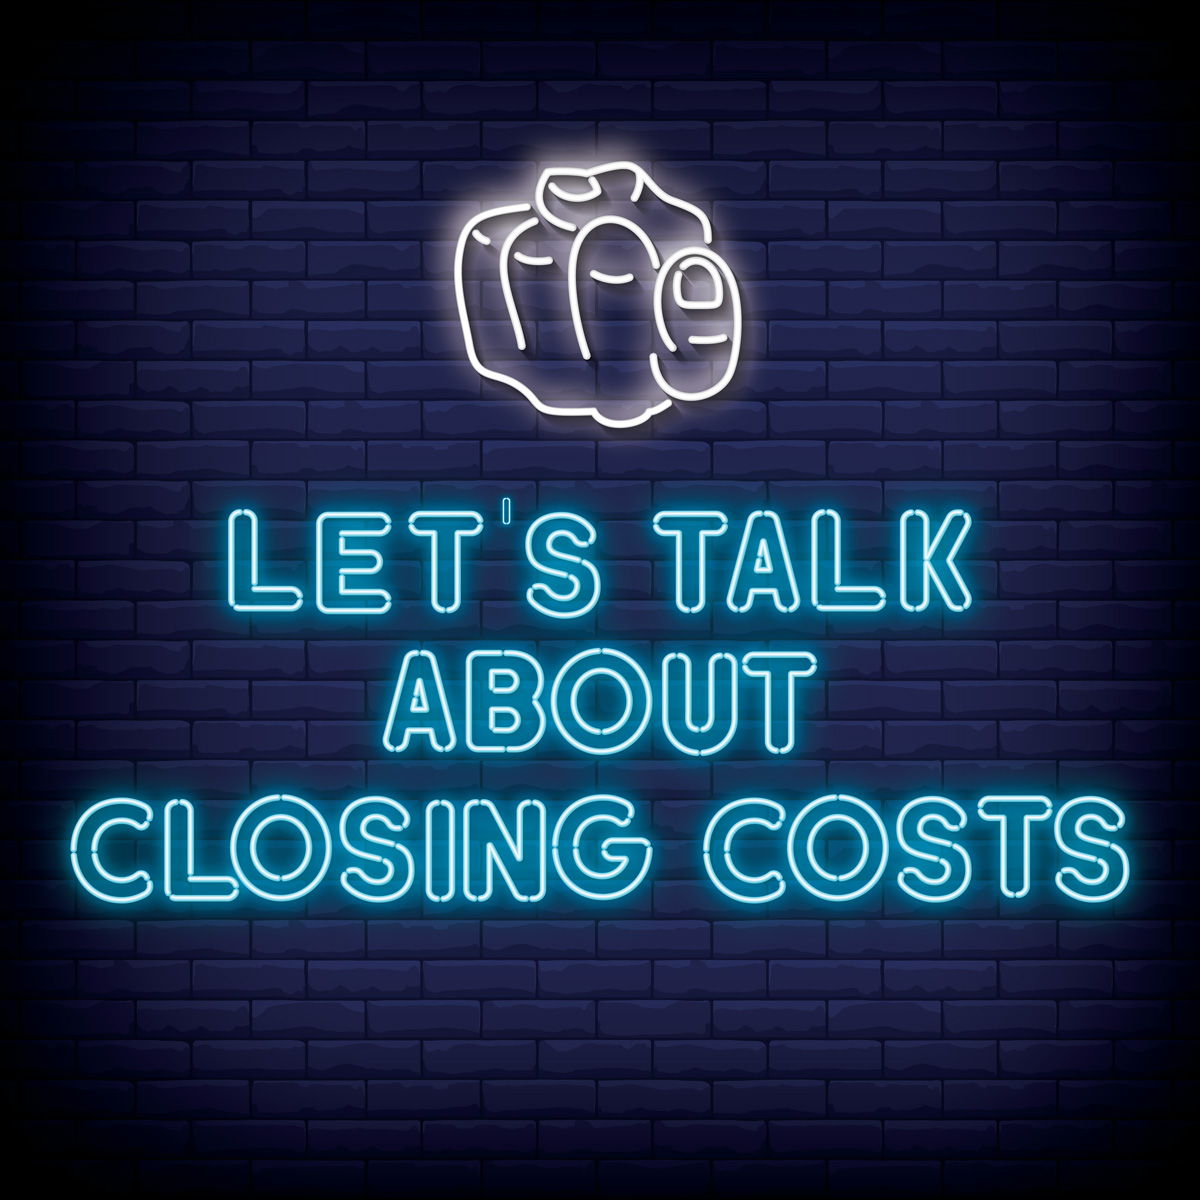 Did you know that the closing costs for a mortgage can vary from state to state and can depend on the type of mortgage you choose? It can be complex but don't worry, I’ll help you break down the fees and explain what they cover. Reach out!